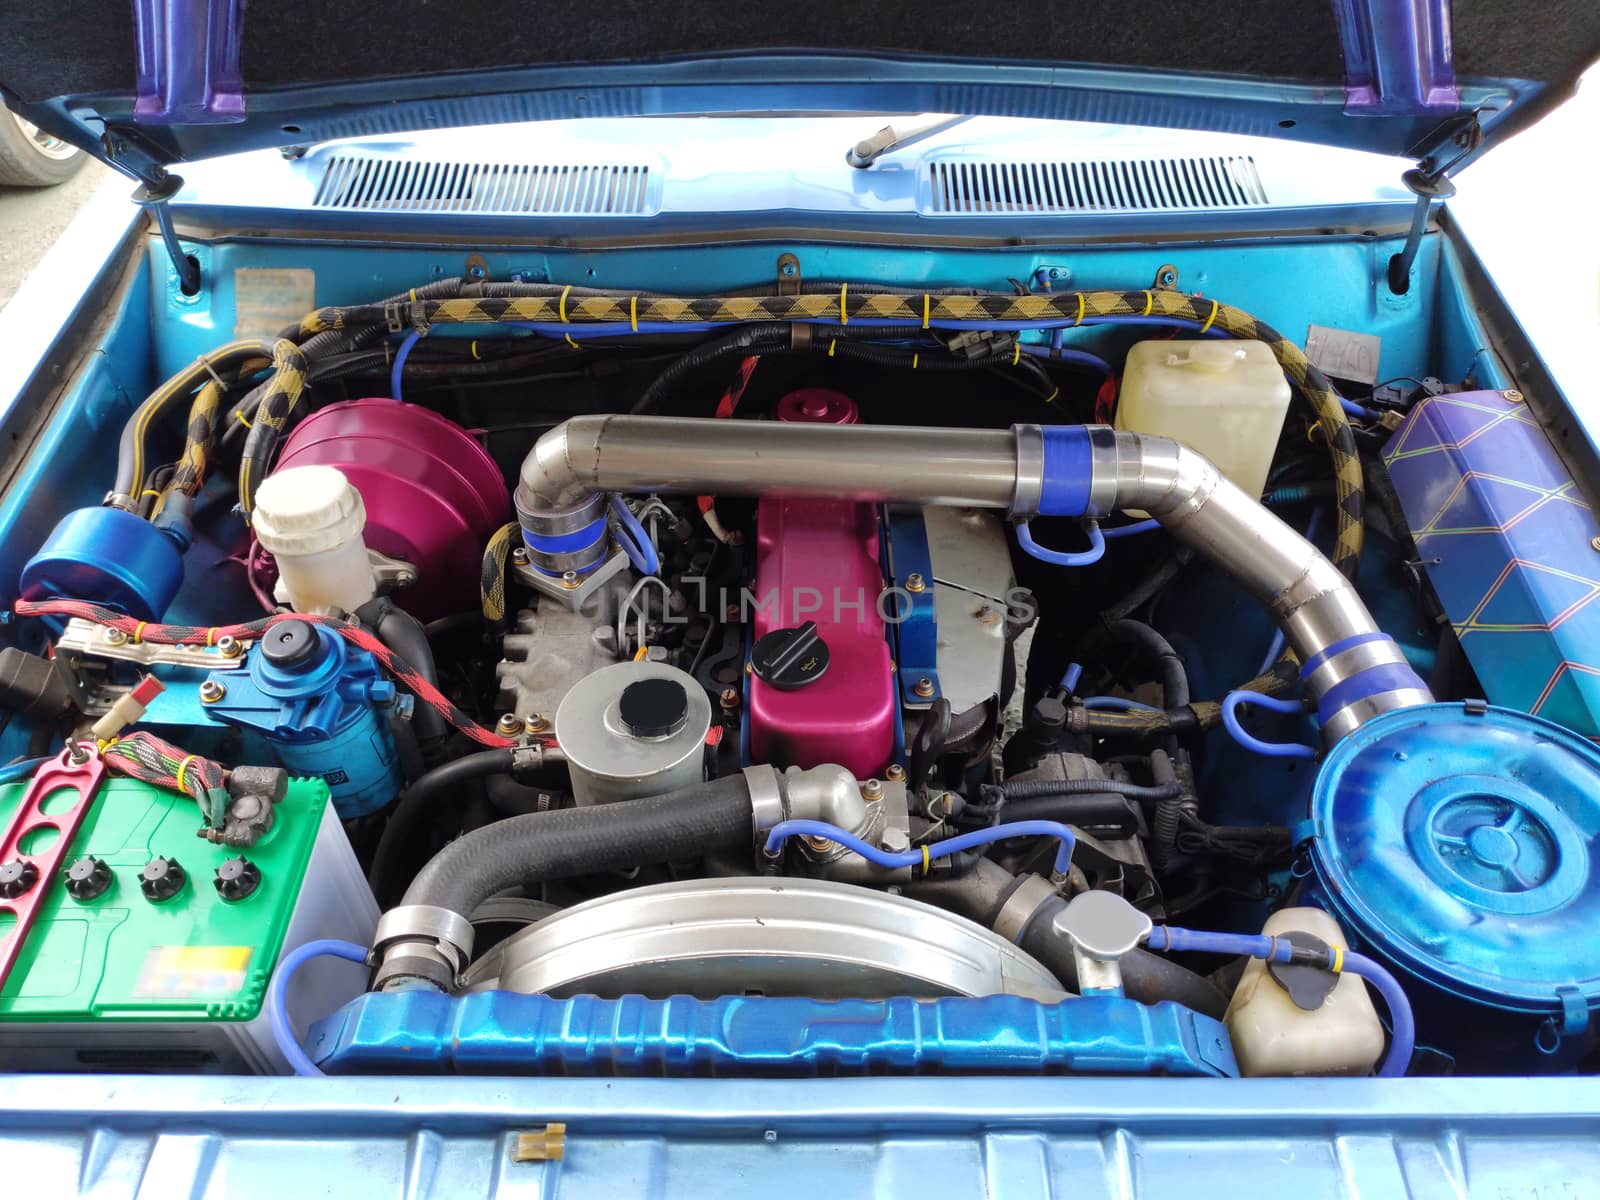 colorful modify engine of the car by rukawajung